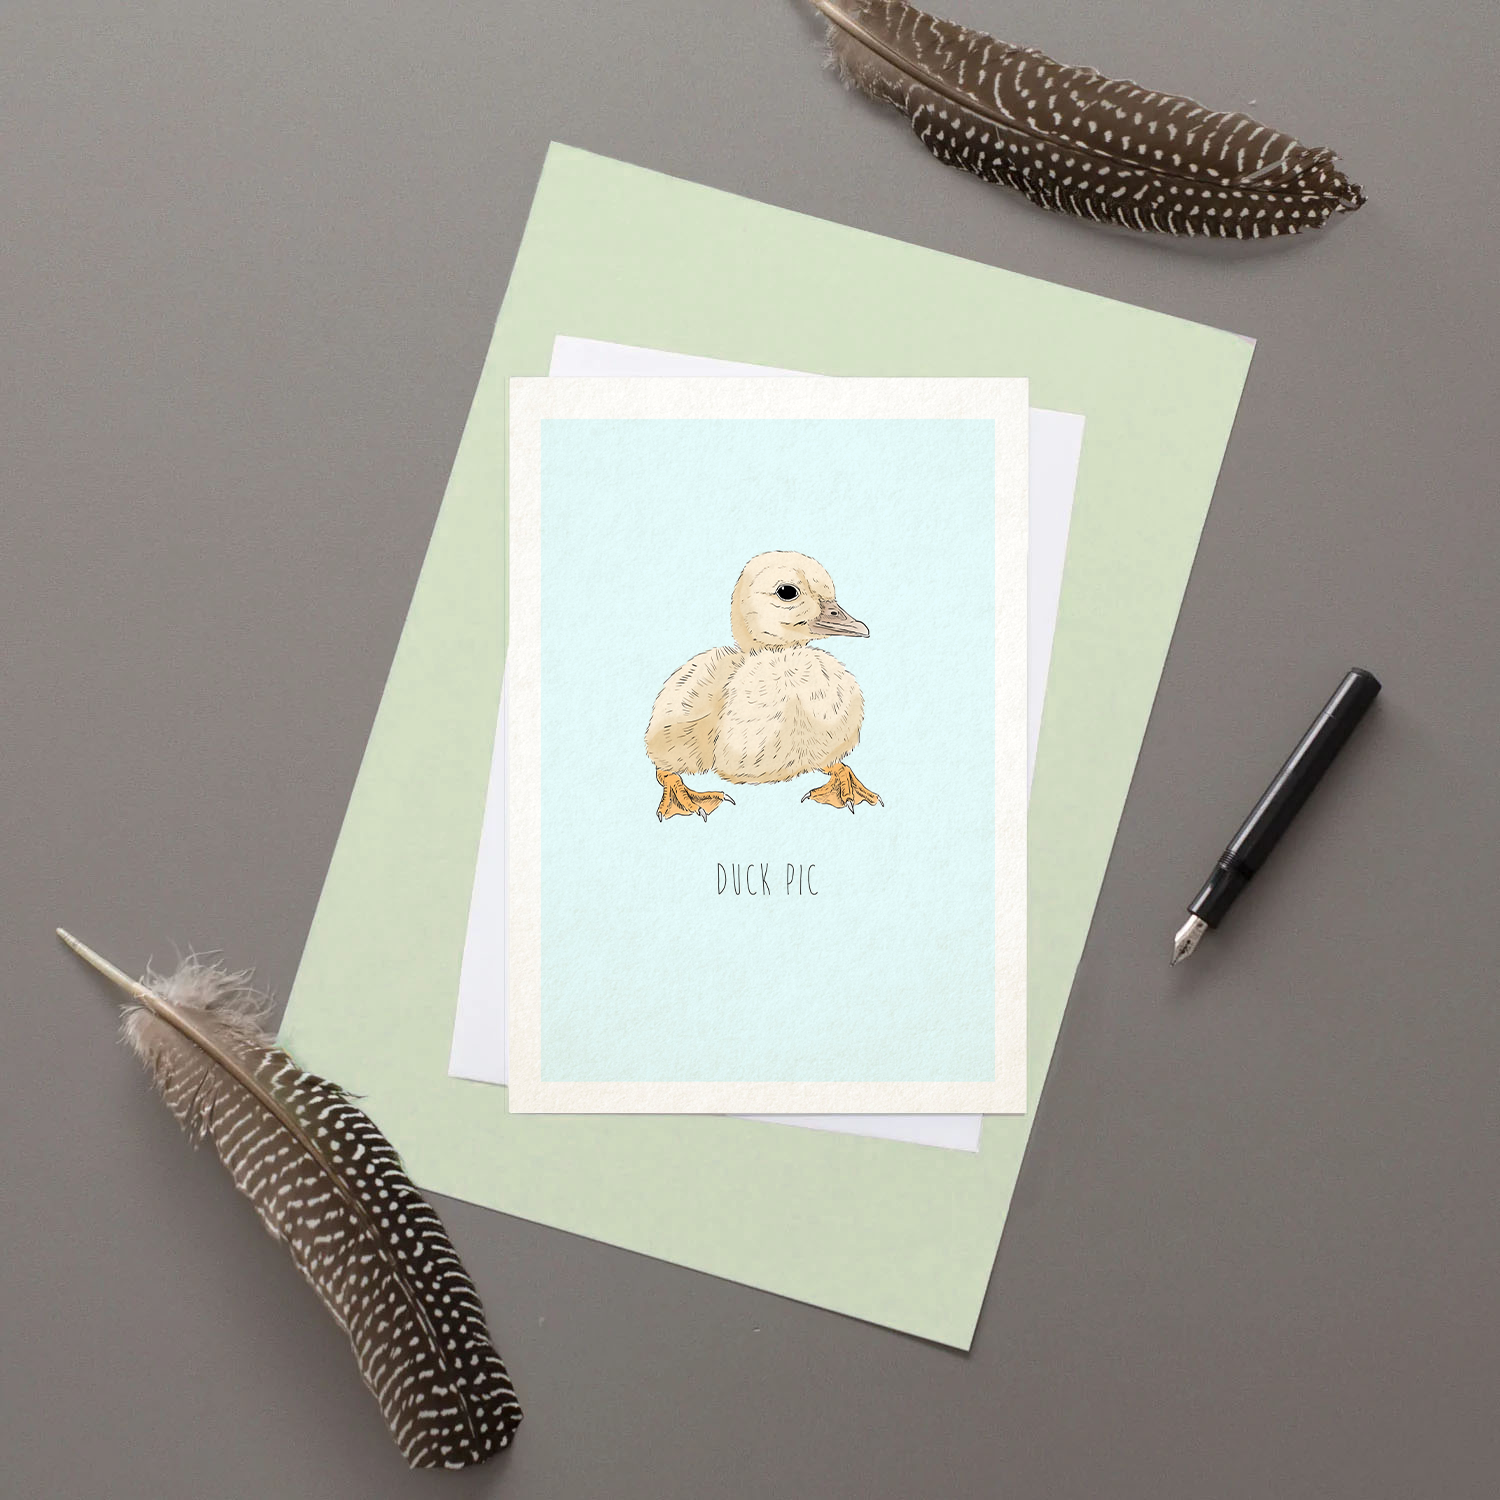 Duck Pic - Greeting Card